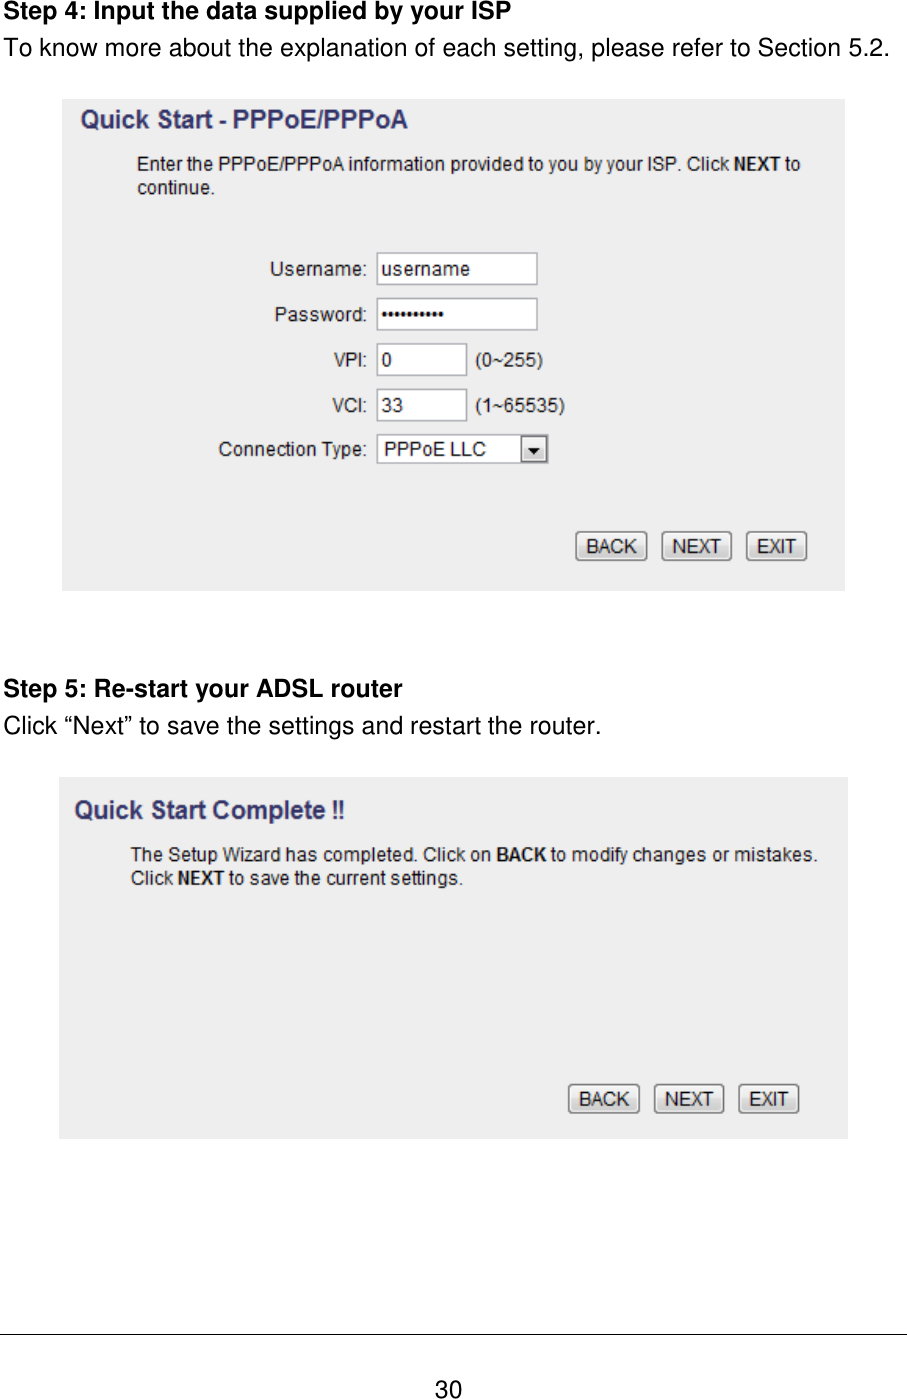   30 Step 4: Input the data supplied by your ISP To know more about the explanation of each setting, please refer to Section 5.2.     Step 5: Re-start your ADSL router Click “Next” to save the settings and restart the router.    